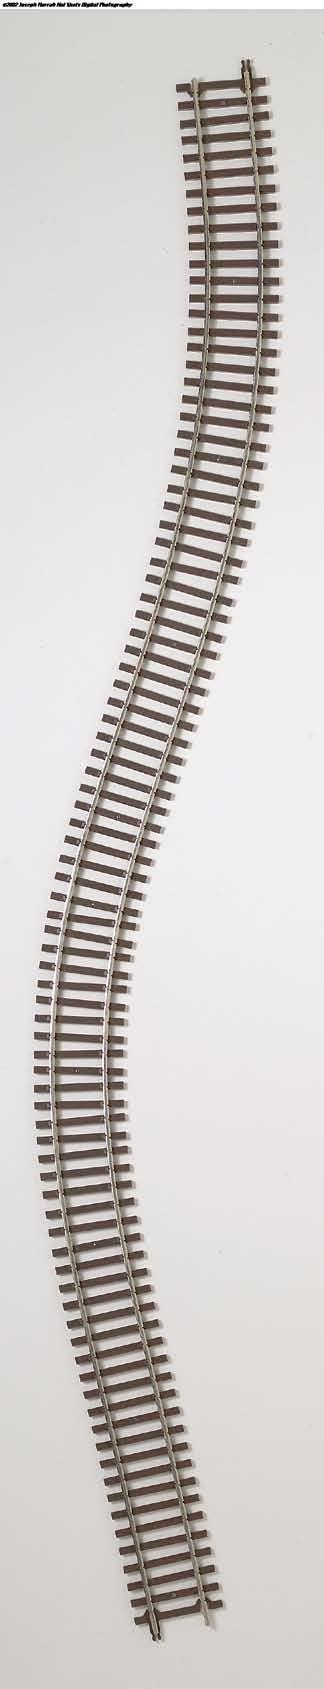 O 2-Rail Nickel Silver Track 2-RAIL PREMIUM NICKEL SILVER 21 ST CENTURY TRACK SYSTEM Atlas O s realism, performance and reliability is offered in 2-rail!